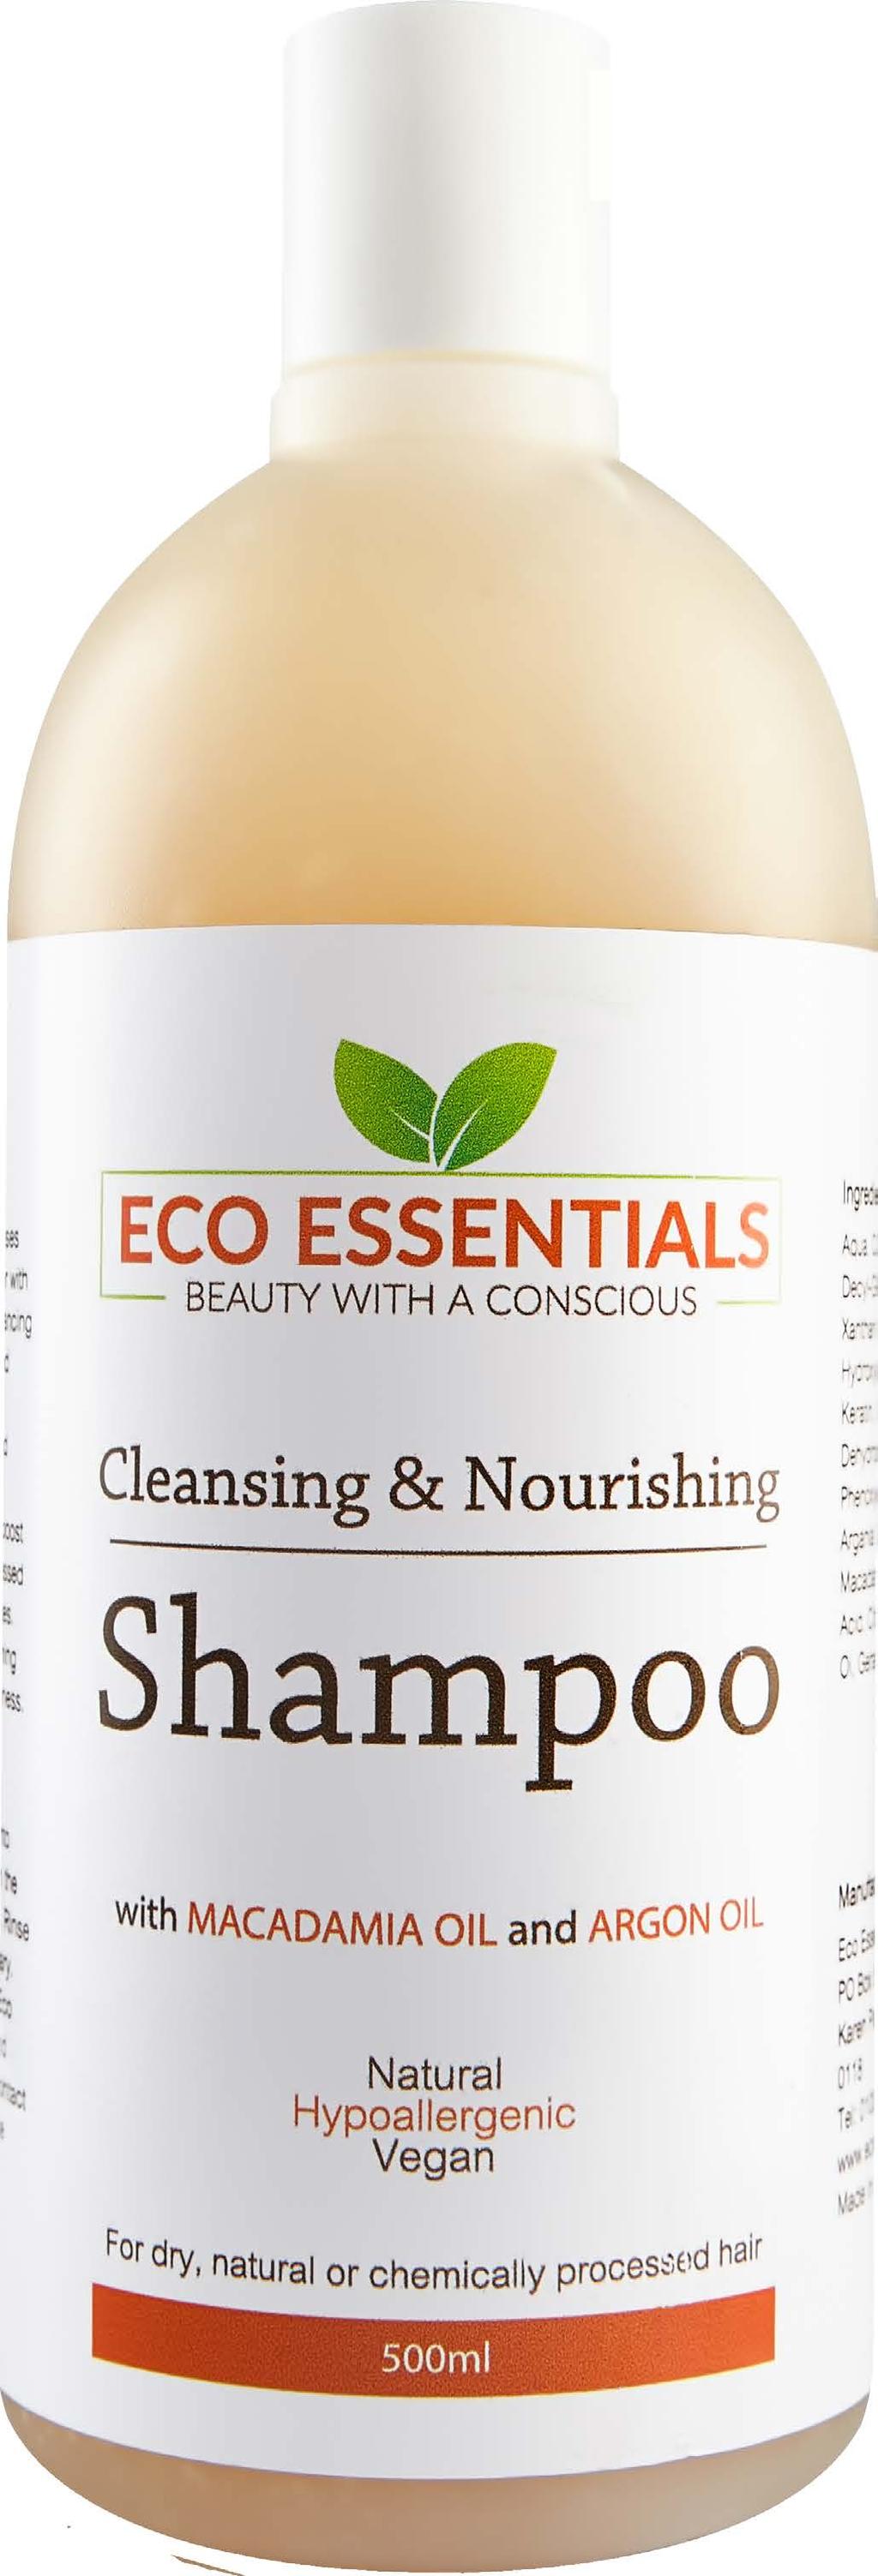 Cleansing & Nourishing Shampoo This sulfate-free shampoo cleanses and nourishes while infusing hair with intense moisture and shine-enhancing nutrients.